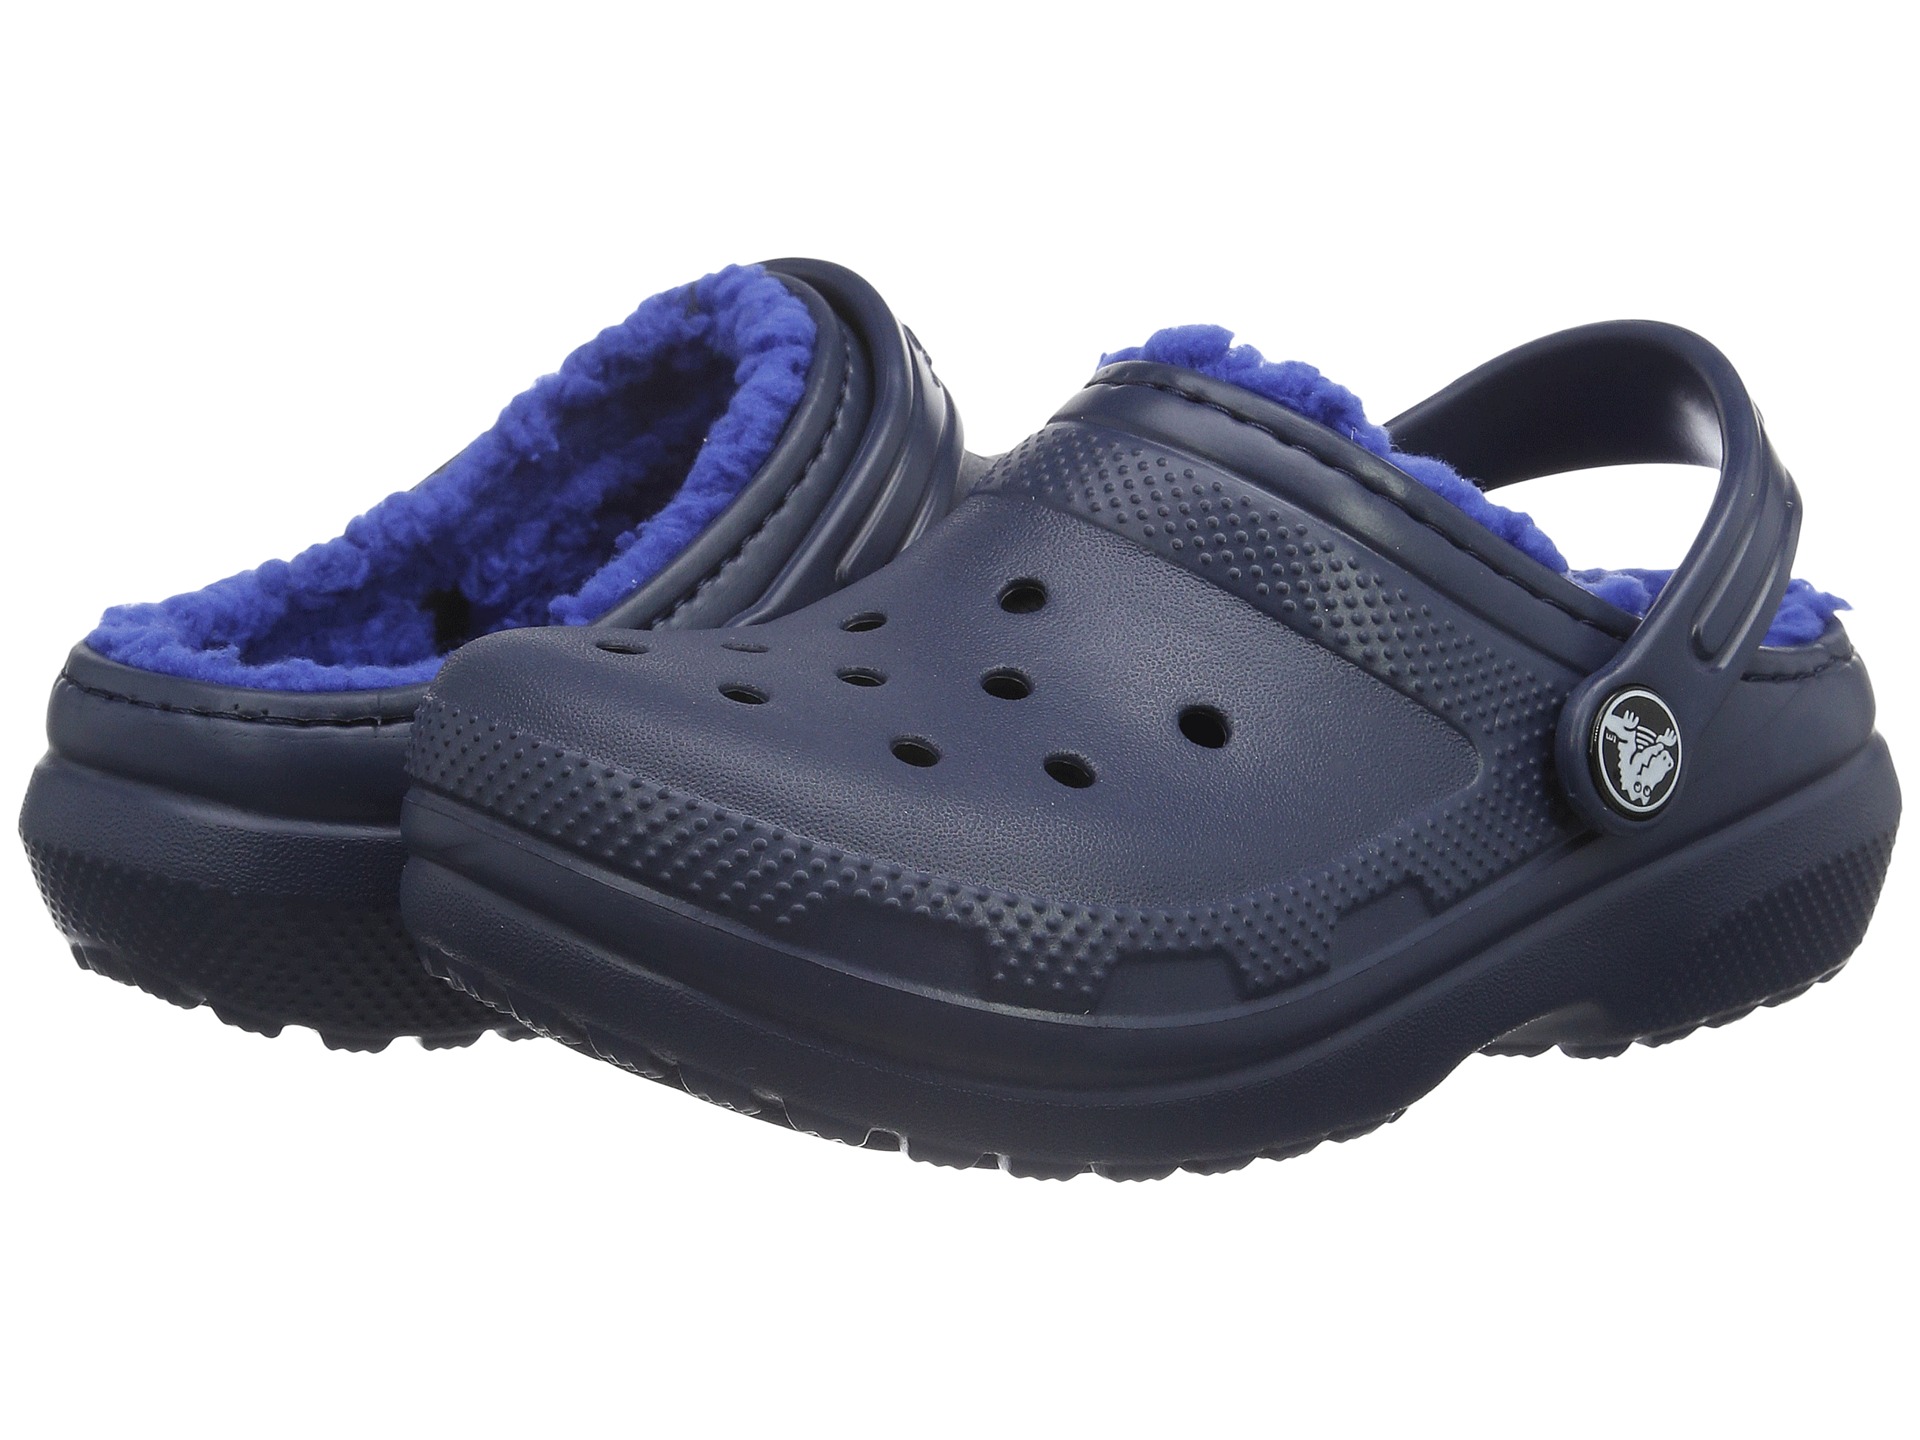 Crocs Kids Classic Lined Clog (Toddler/Little Kid) at Zappos.com